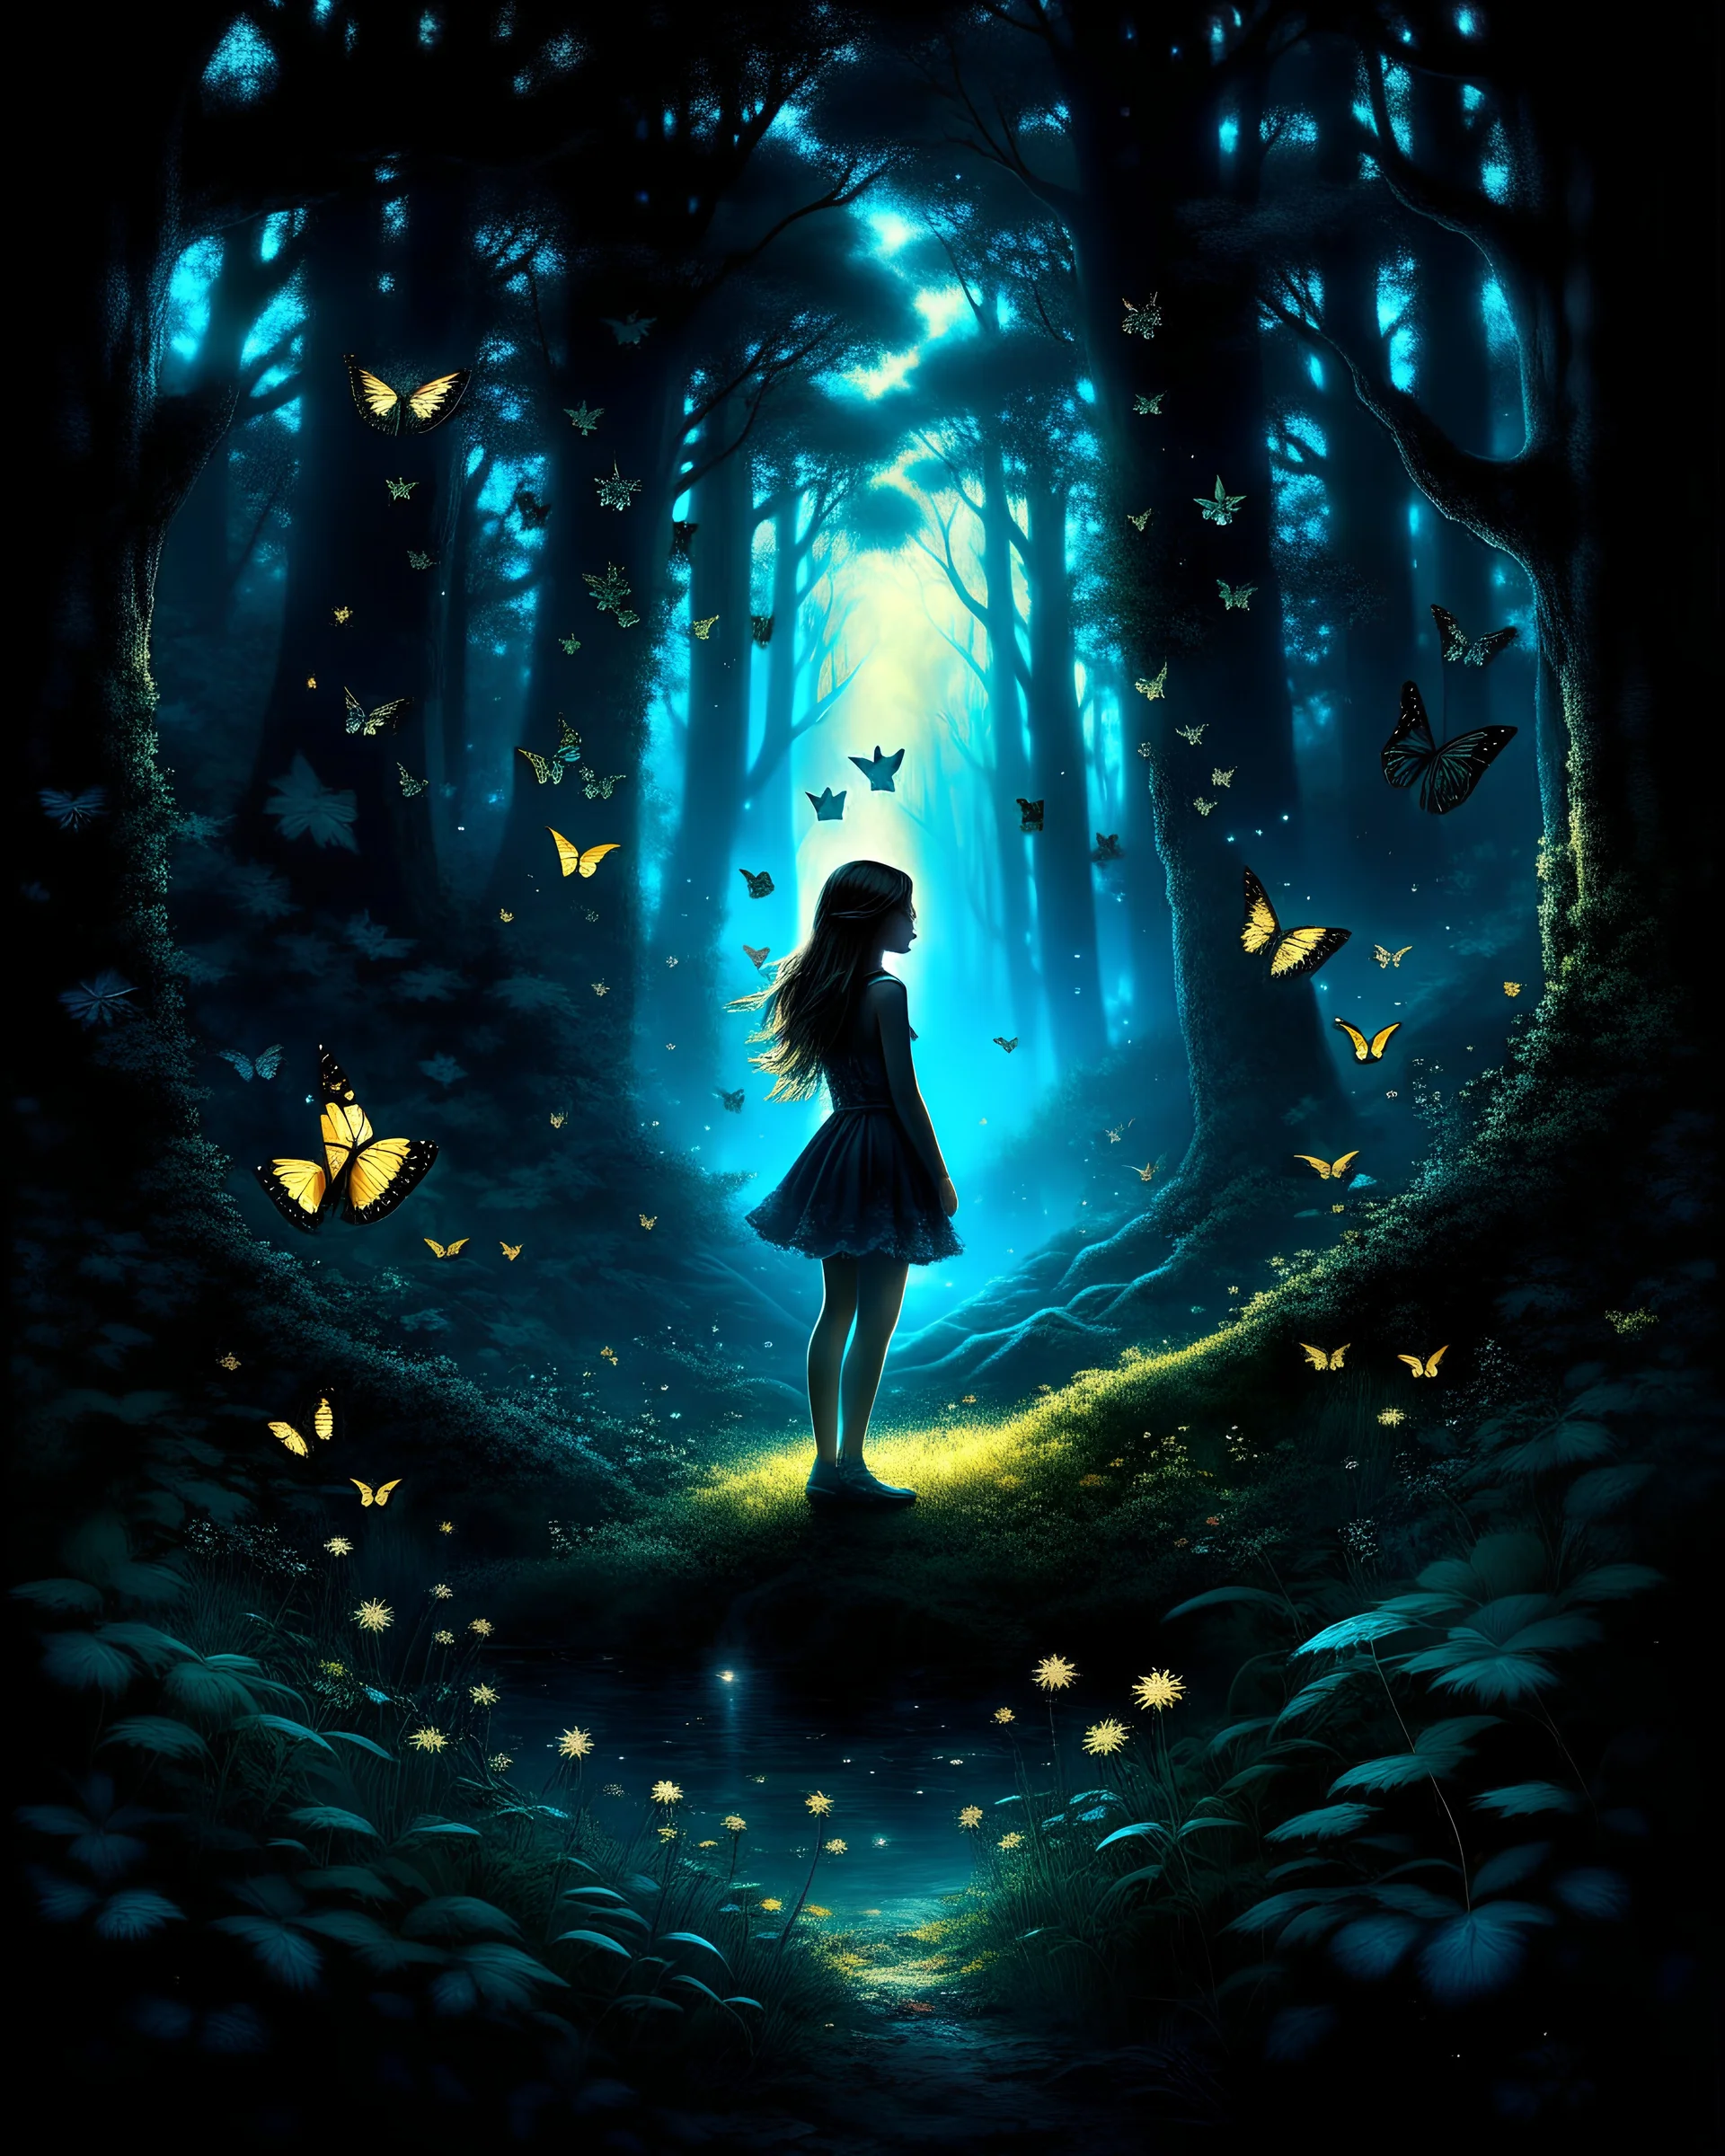 Deep in the forest, a girl's dream flies, Among the towering trees, on an enchanted dark night. His voice, a sweet melody, pierced the silent air, As the glittering butterflies dance, their wings shine brightly. A realm of fantasy unfolds, where imaginations soar, His soul was forever intertwined with the chorus of nature. Through whispered harmonies, he finds peace and quiet, As the forest and its wonders, his dreams are slowly released.